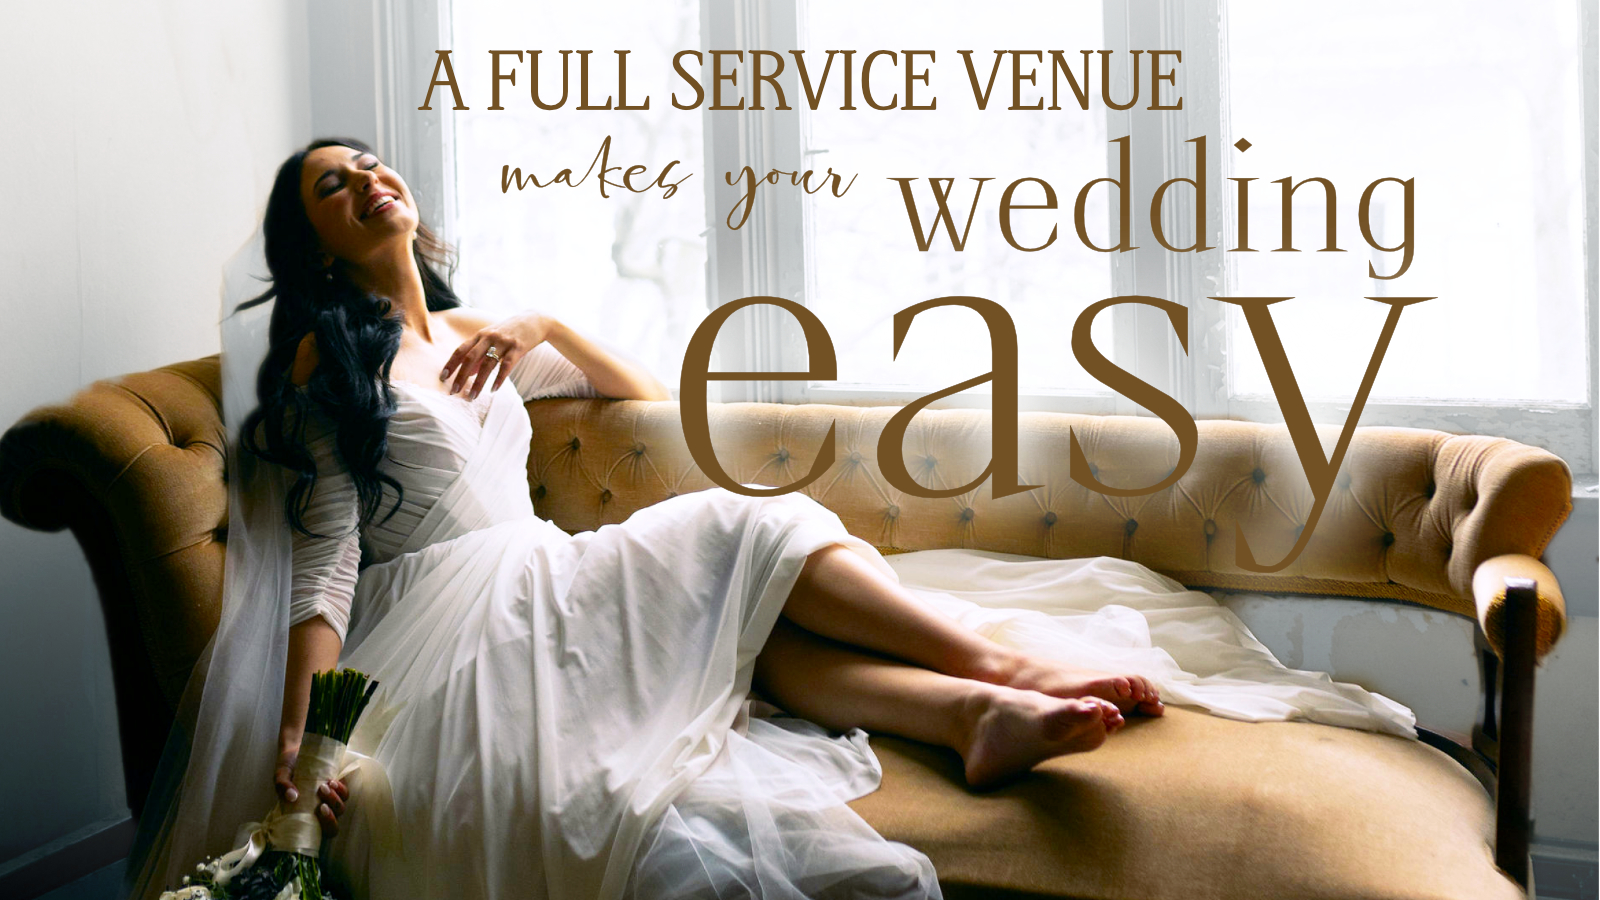 A full service venue makes your wedding easy!